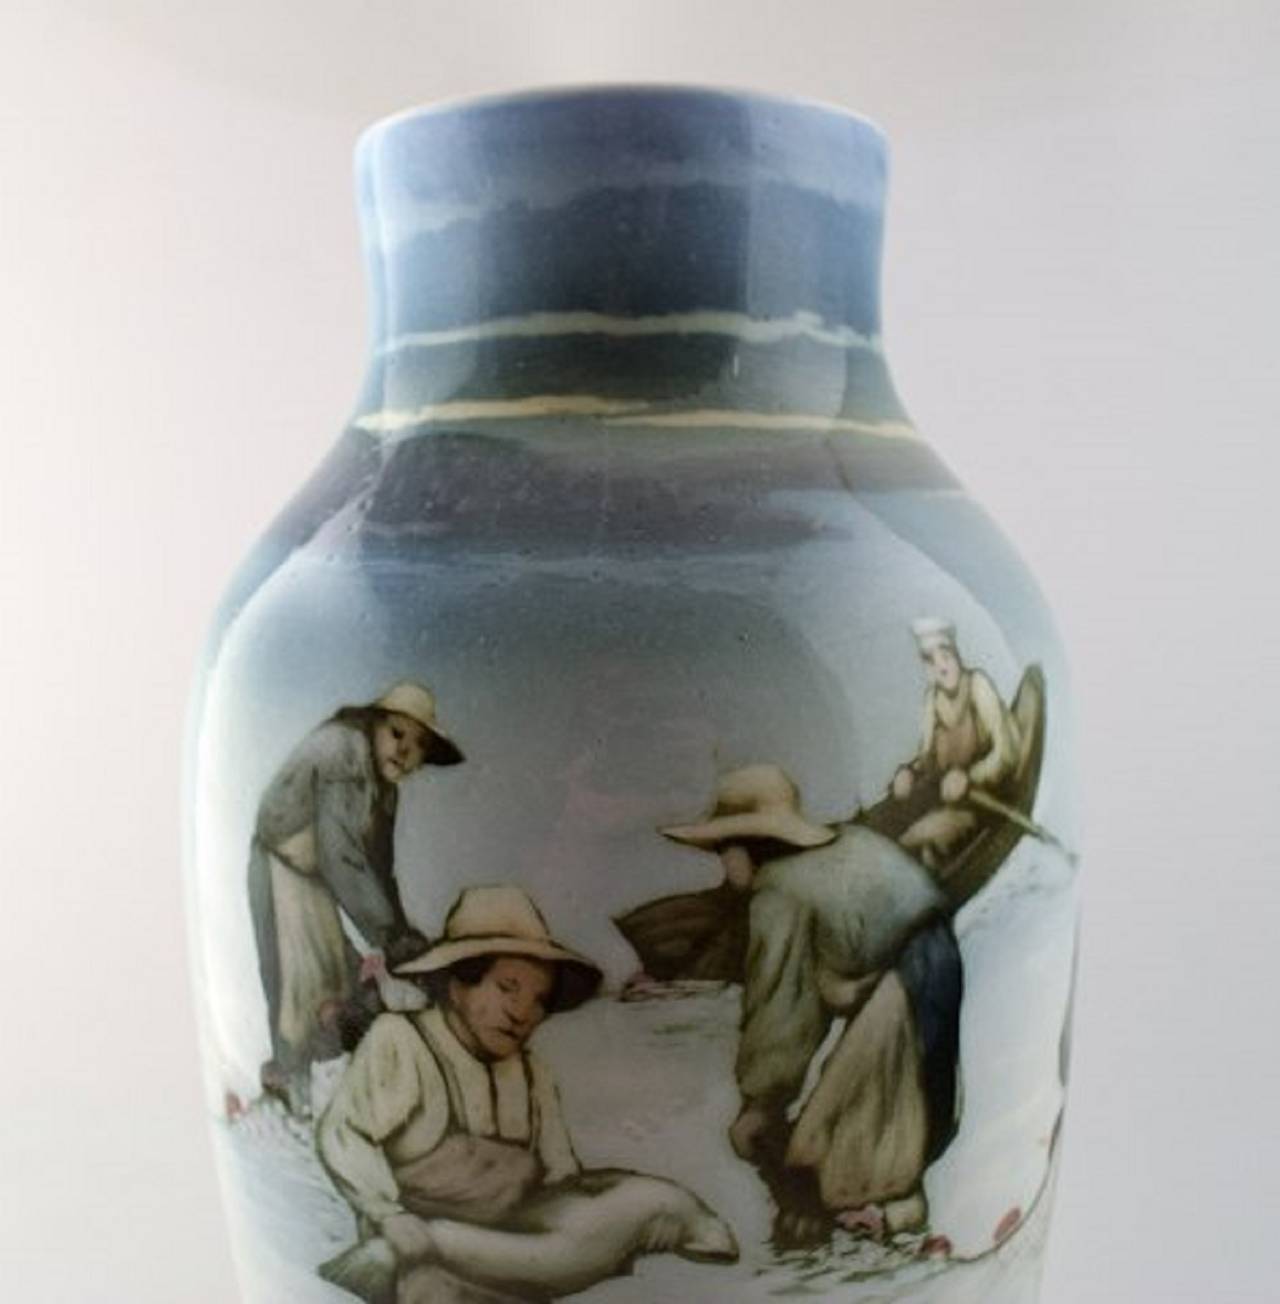 Large Art Nouveau unique Ro¨rstrand Nils Emil Lundstro¨m (1865-1960) porcelain vase. Decorated with fishermen.
38 cm height. Beautiful vase of high quality.
Signed Ro¨rstrand and NL.
In very good condition.